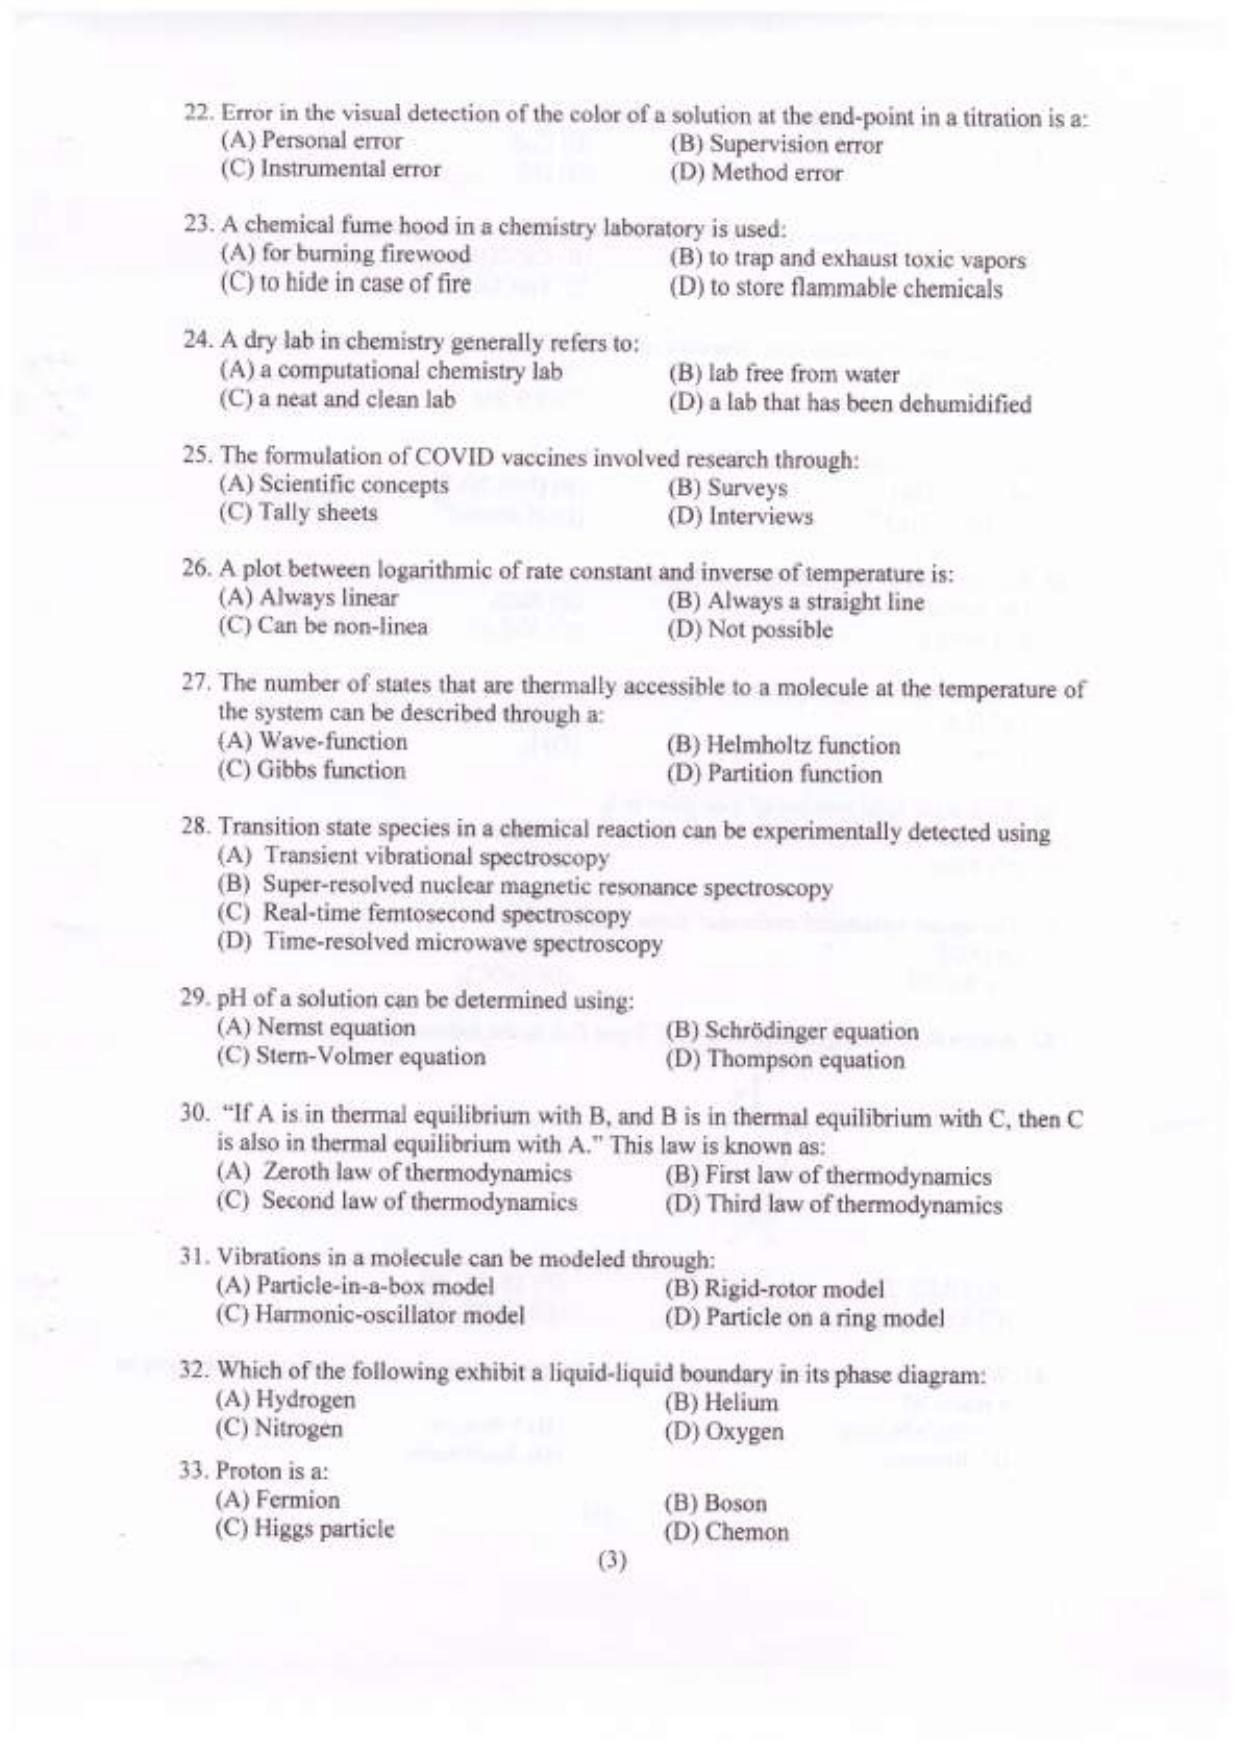 PU MPET Anthropology 2022 Question Papers - Page 90